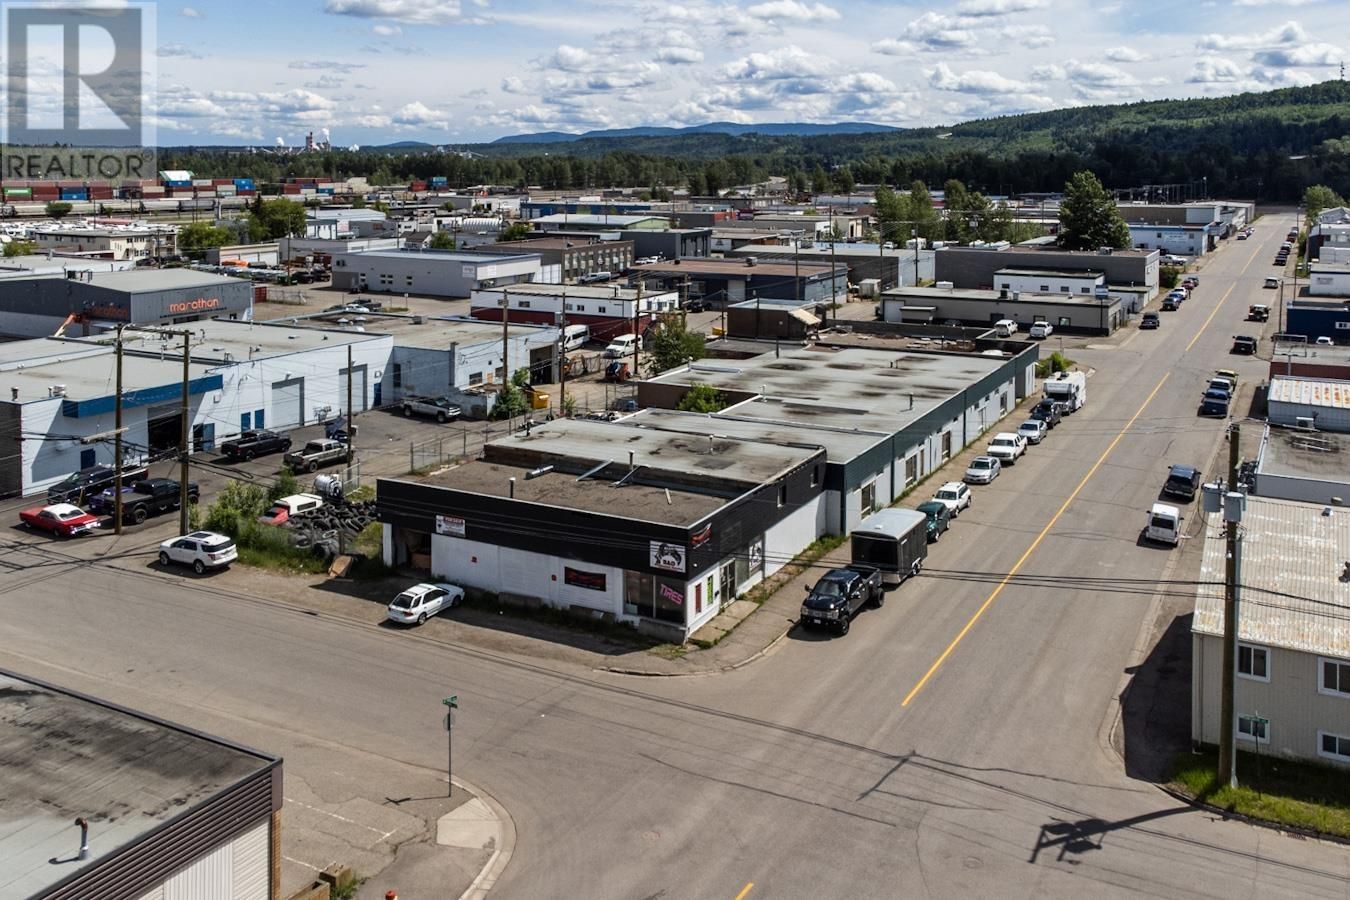 Main Photo: 804-890 4TH AVENUE in PG City Central: Industrial for sale : MLS®# C8051999